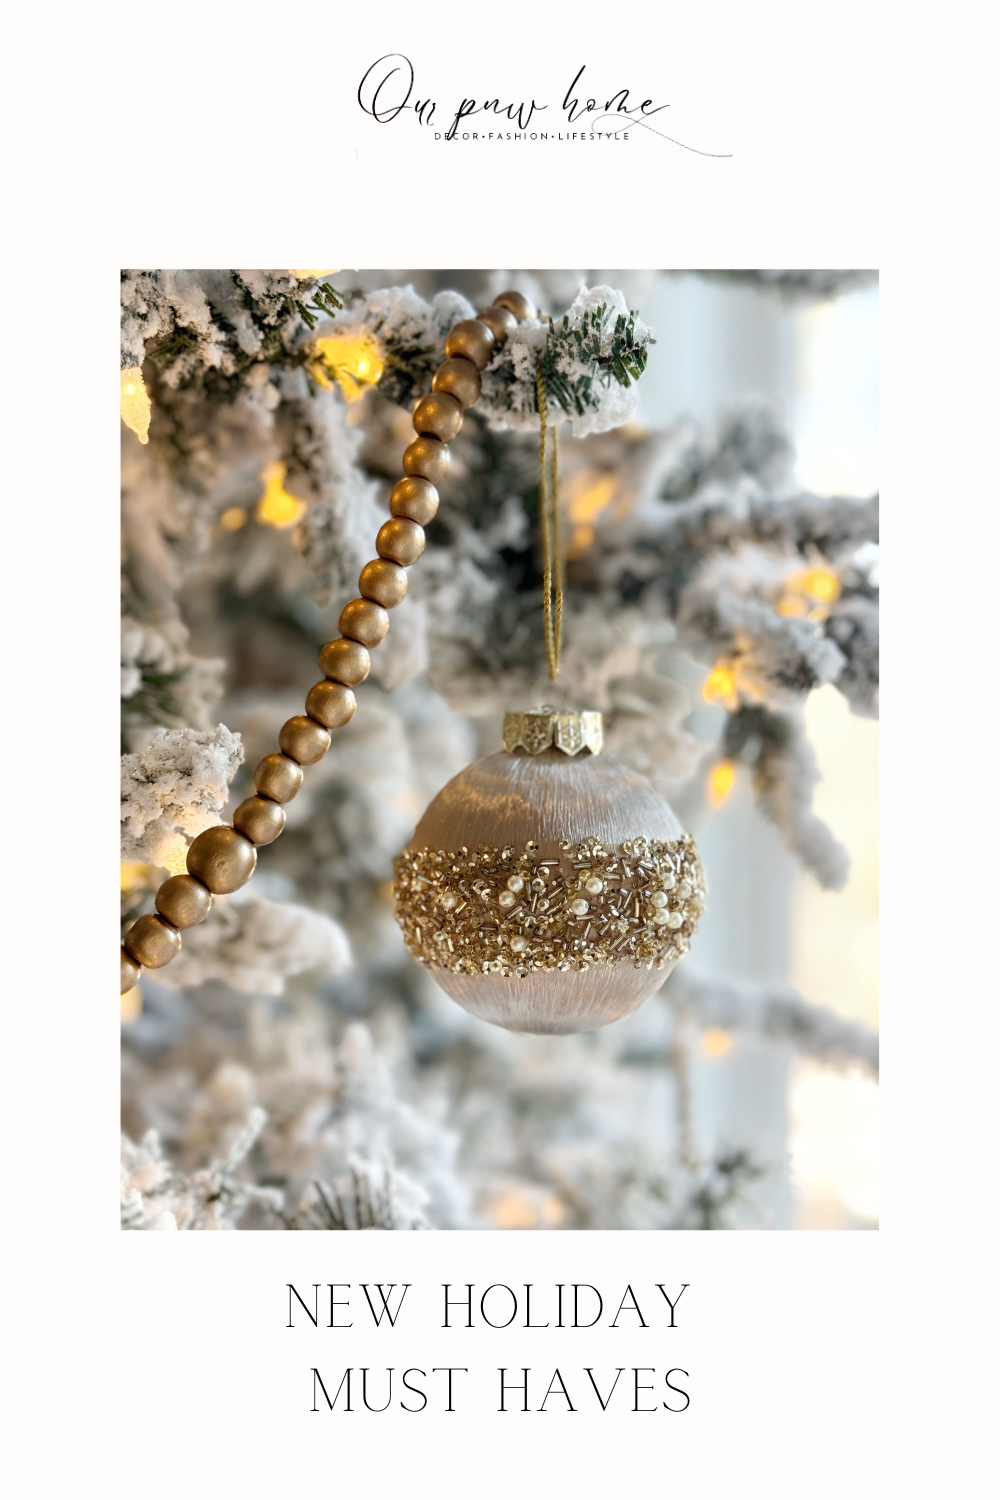 new holiday must haves | #new #holiday #musthaves #christmas #holidaydecor #seasonal #ornament #christmastree #glitter #satin #bulb #snowy